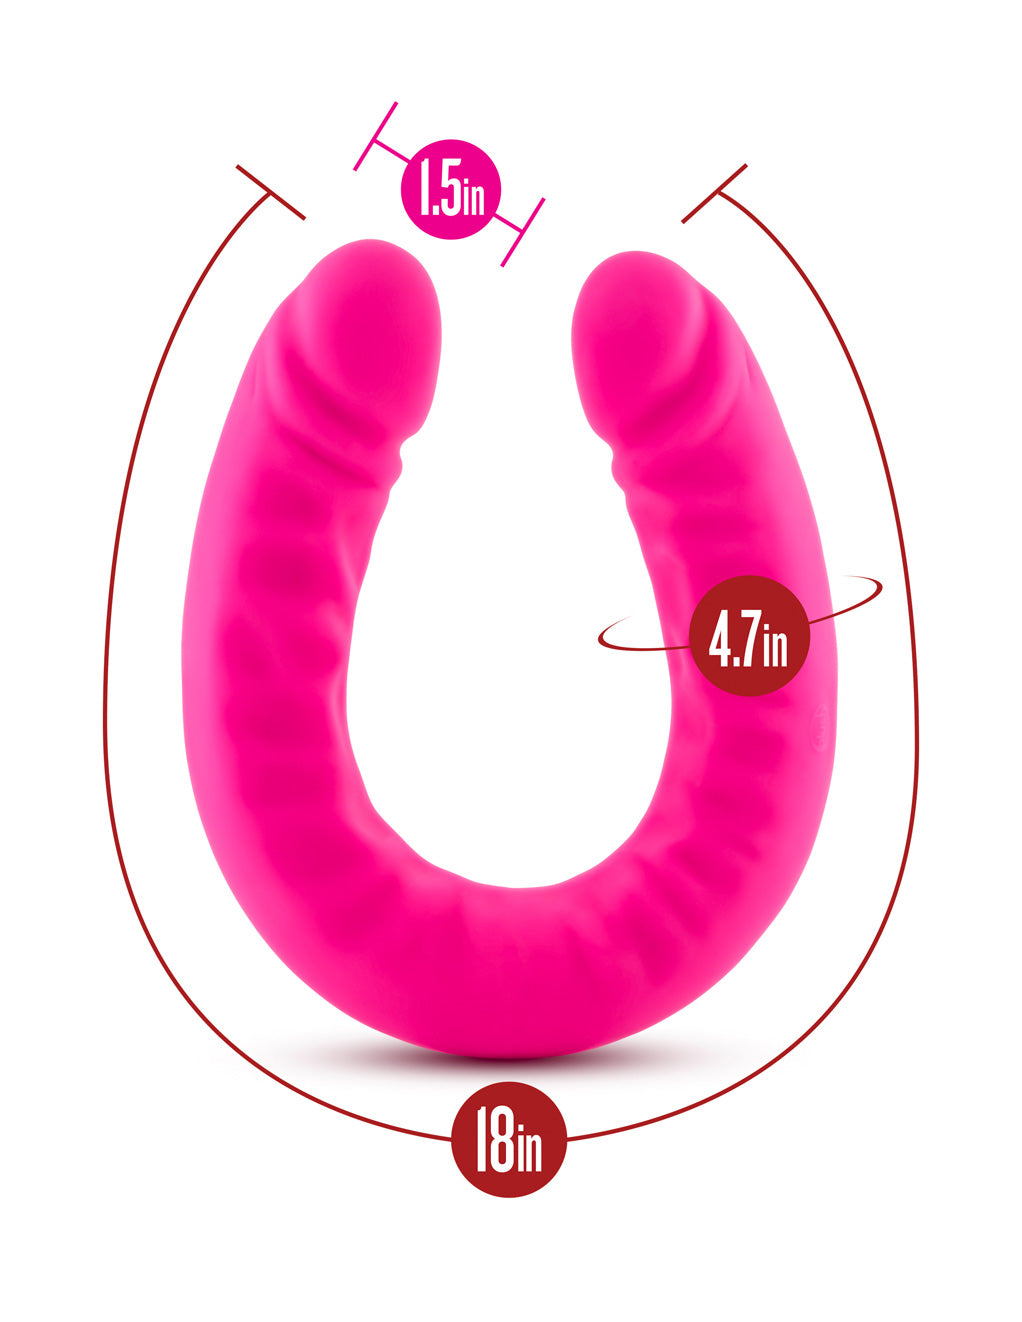 Ruse 18-inch Silicone Double Dong By Blush Novelties Sizing